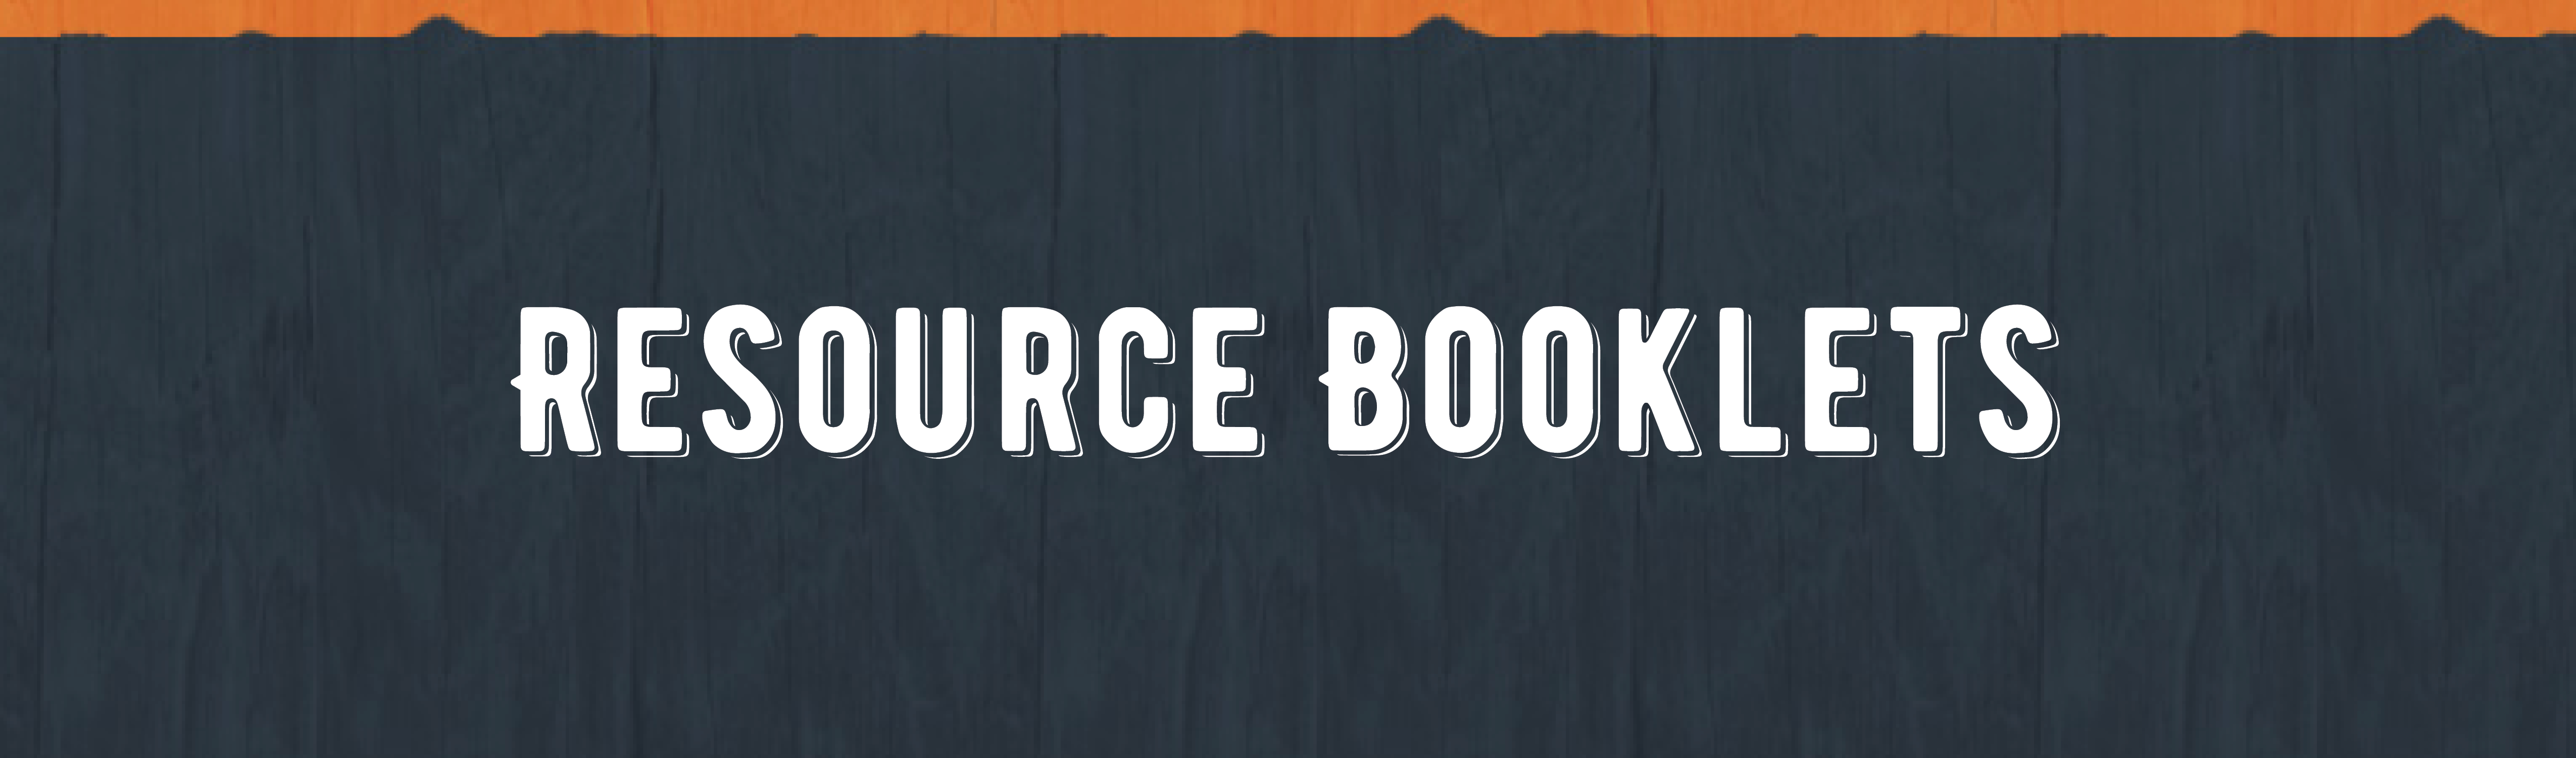 Resource Bookslets